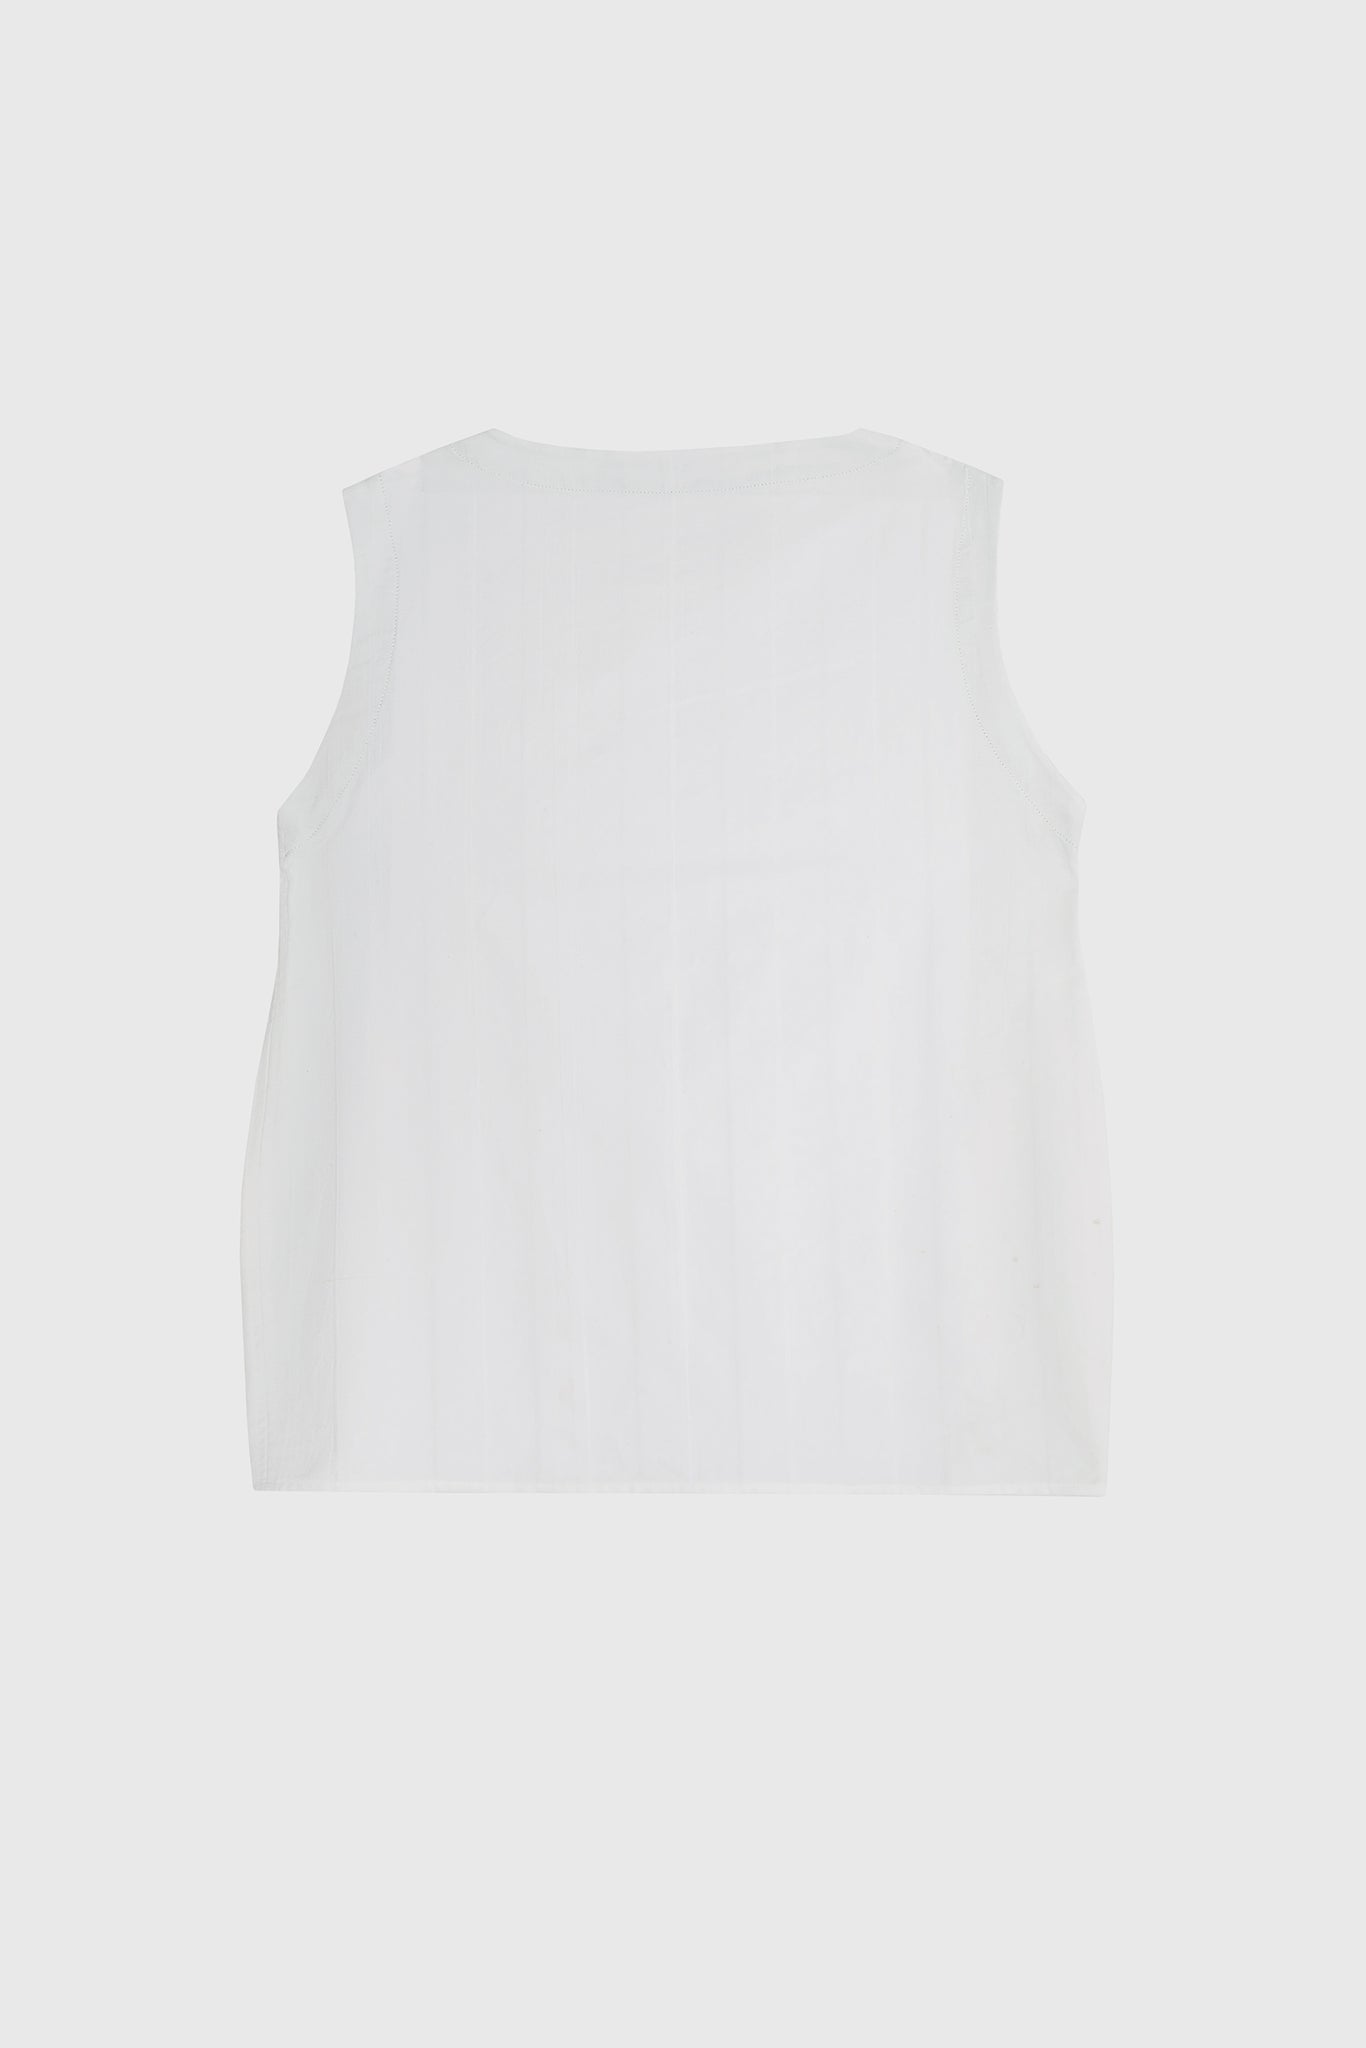 white Tee, sleeveless, from white damask cotton, the figure of a dog embroidered on the front